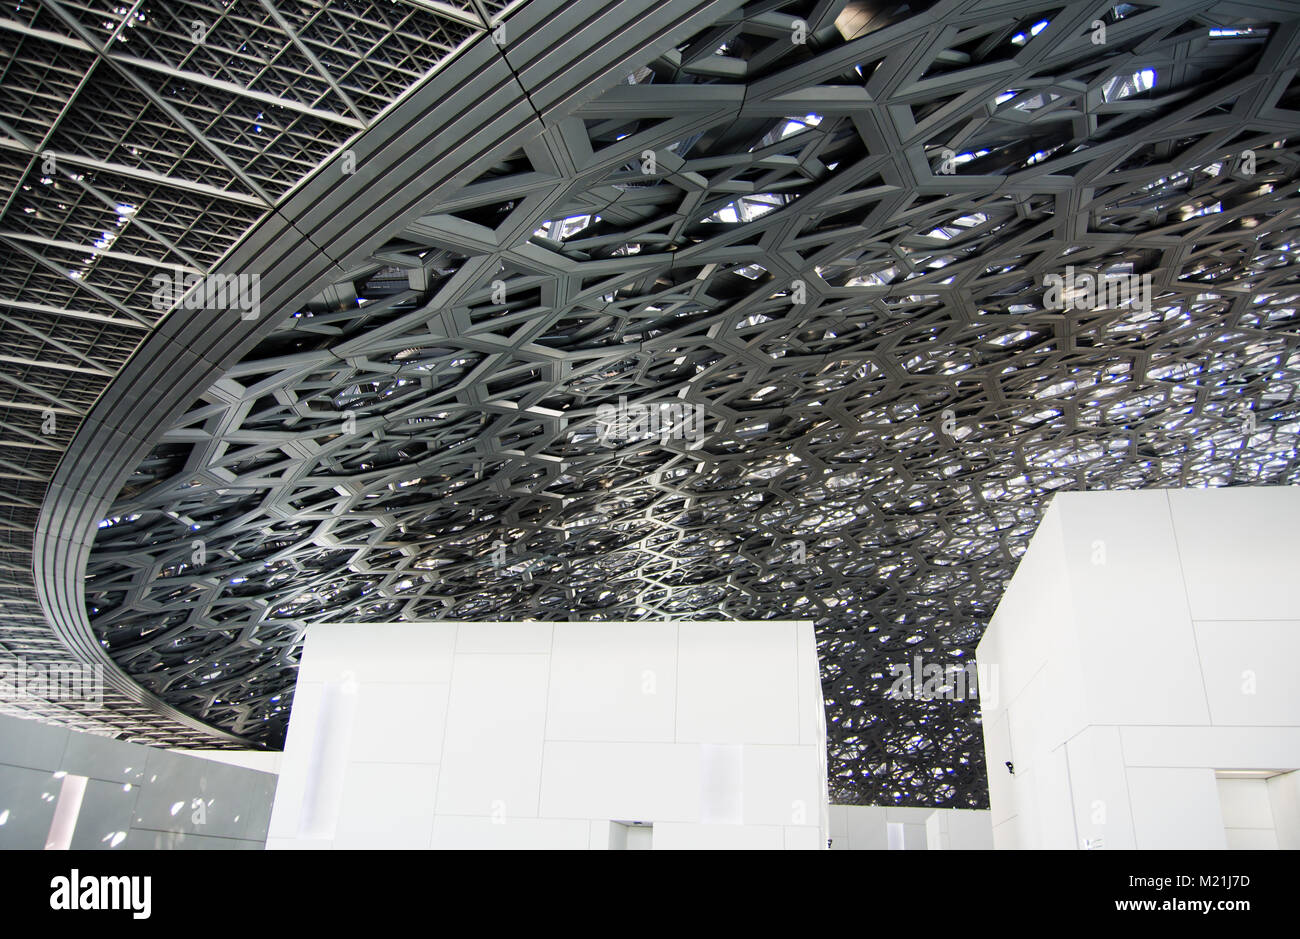 ABU DHABI, UNITED ARAB EMIRATES - JANUARY 26, 2018: Modern roof and ceiling of Louvre Abu Dhabi with Rain of Light effect by sun passing the openings Stock Photo